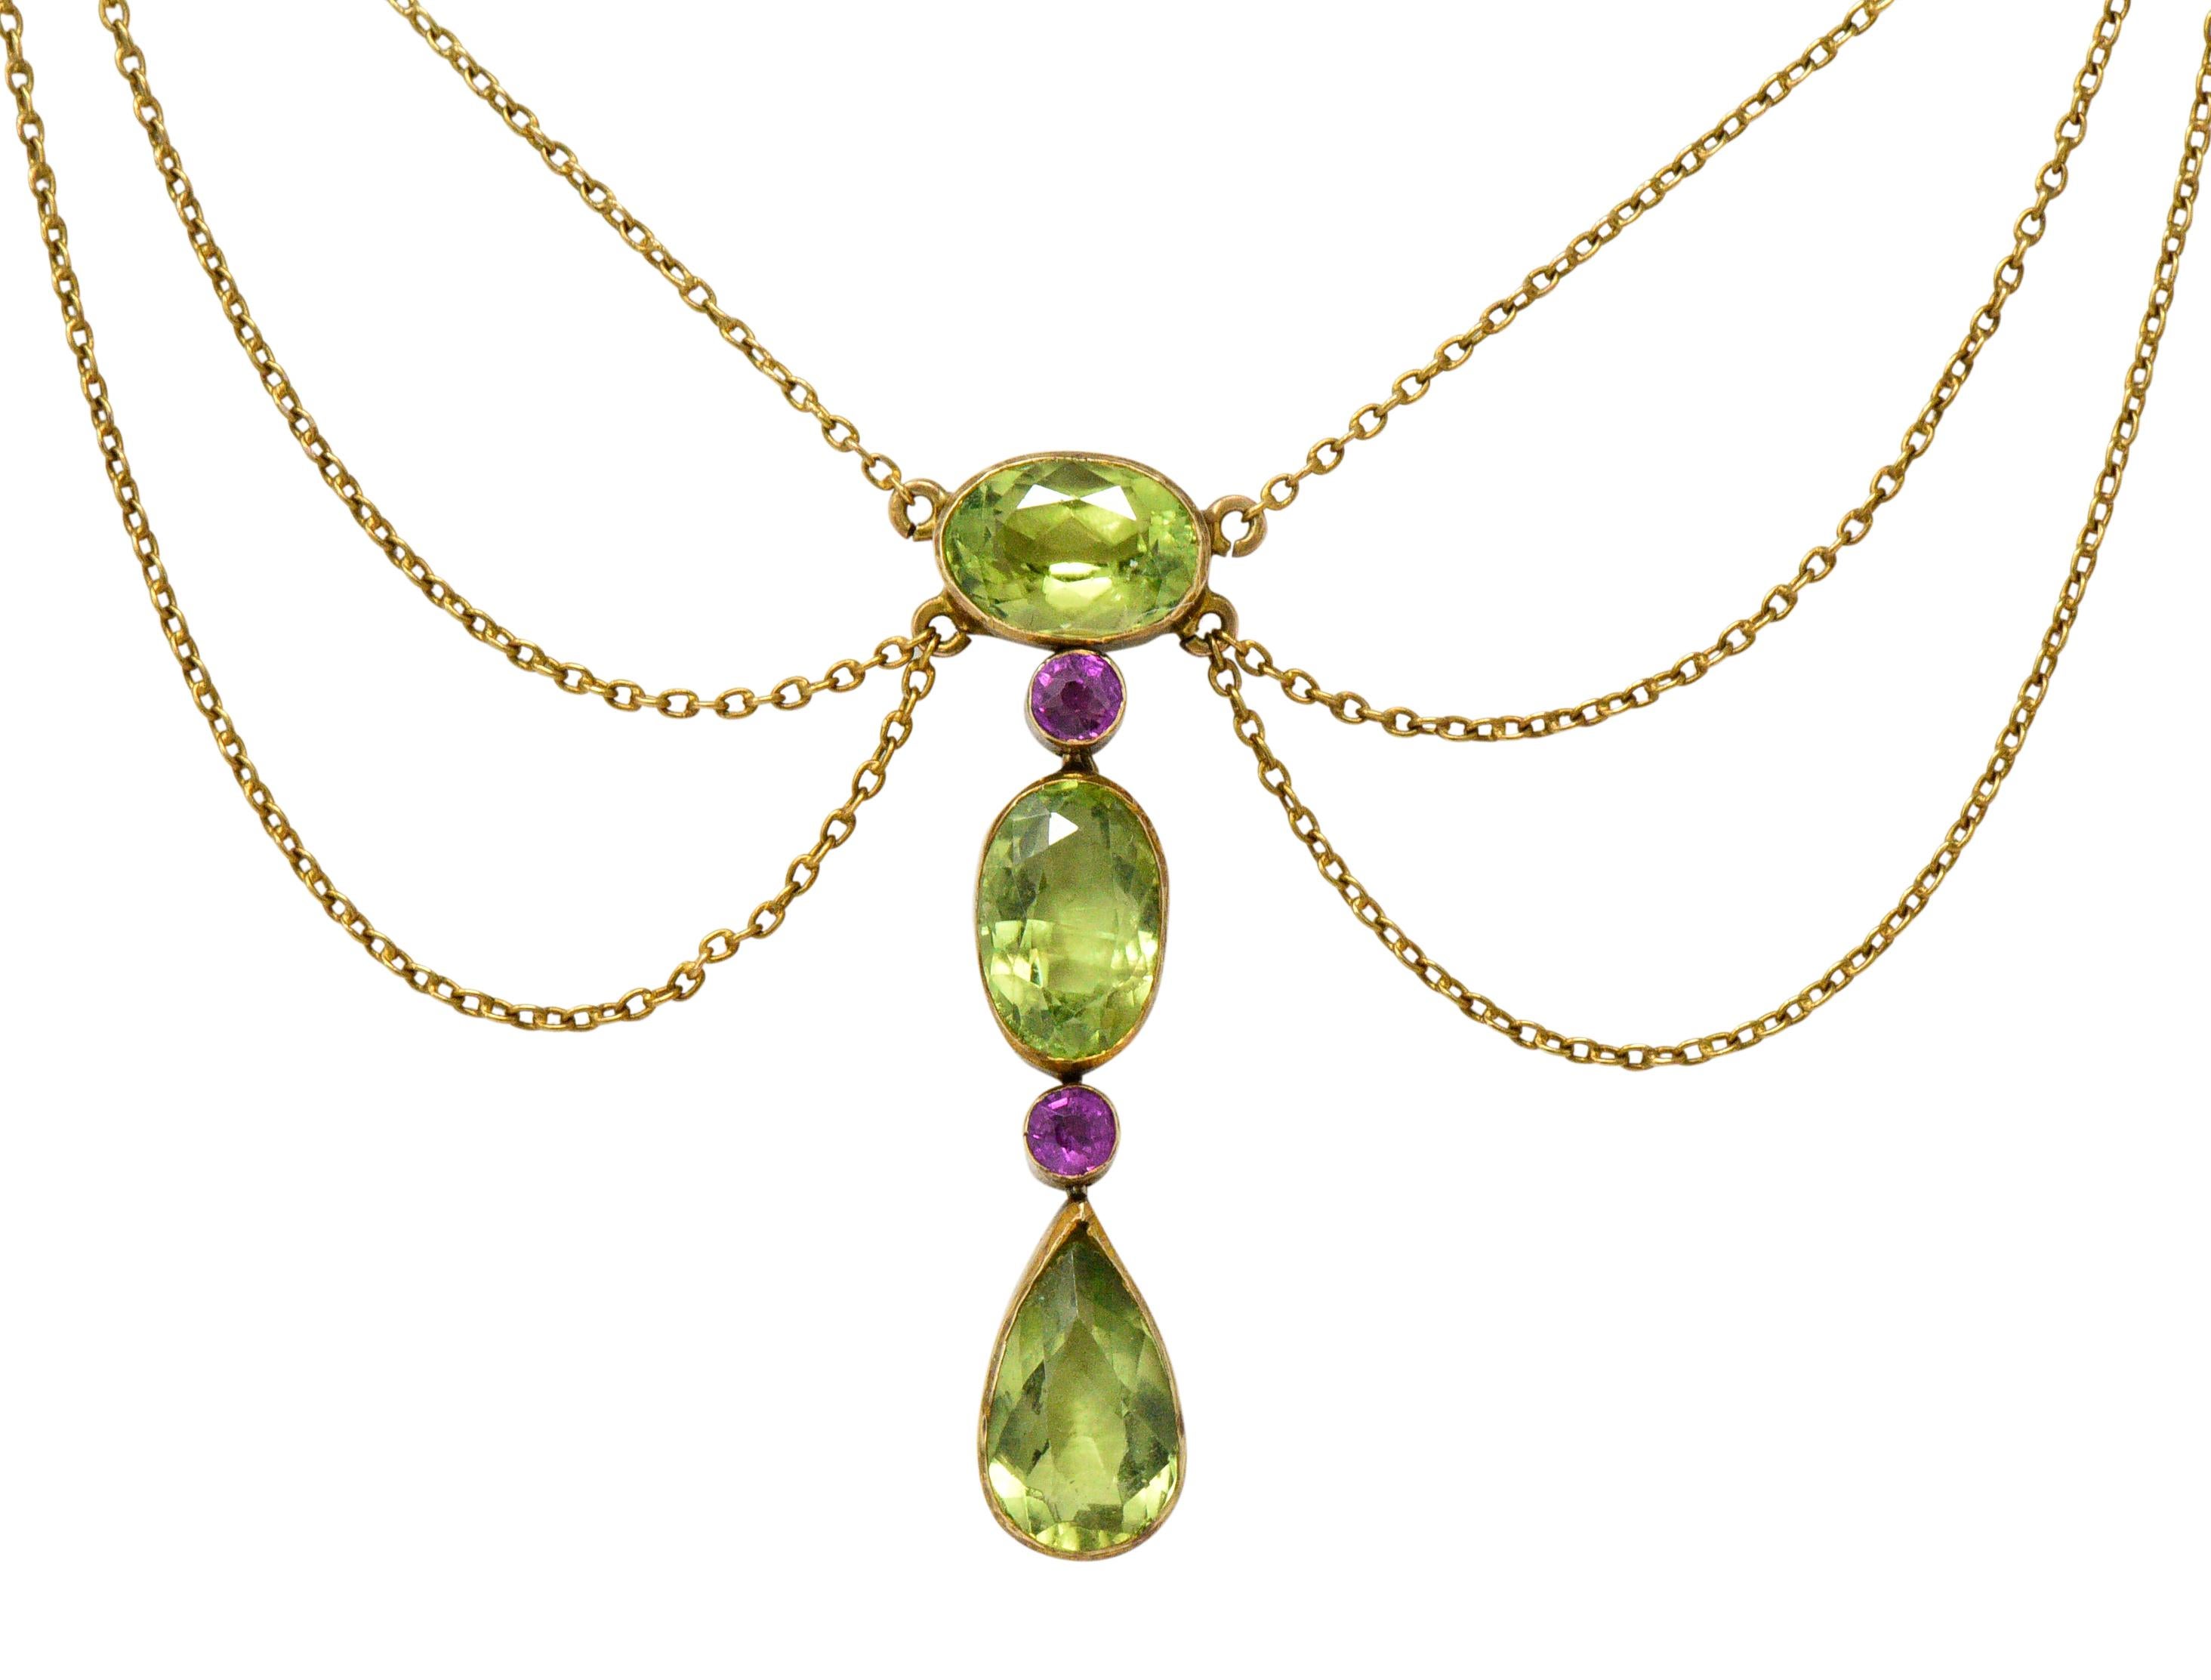 Swag style drop necklace centering six bezel set gemstones; symbolically suffragette in color

Larger stones are round, oval, and pear mixed cut peridot weighing approximately 6.45 carats; very well-matched and medium-light lime green in